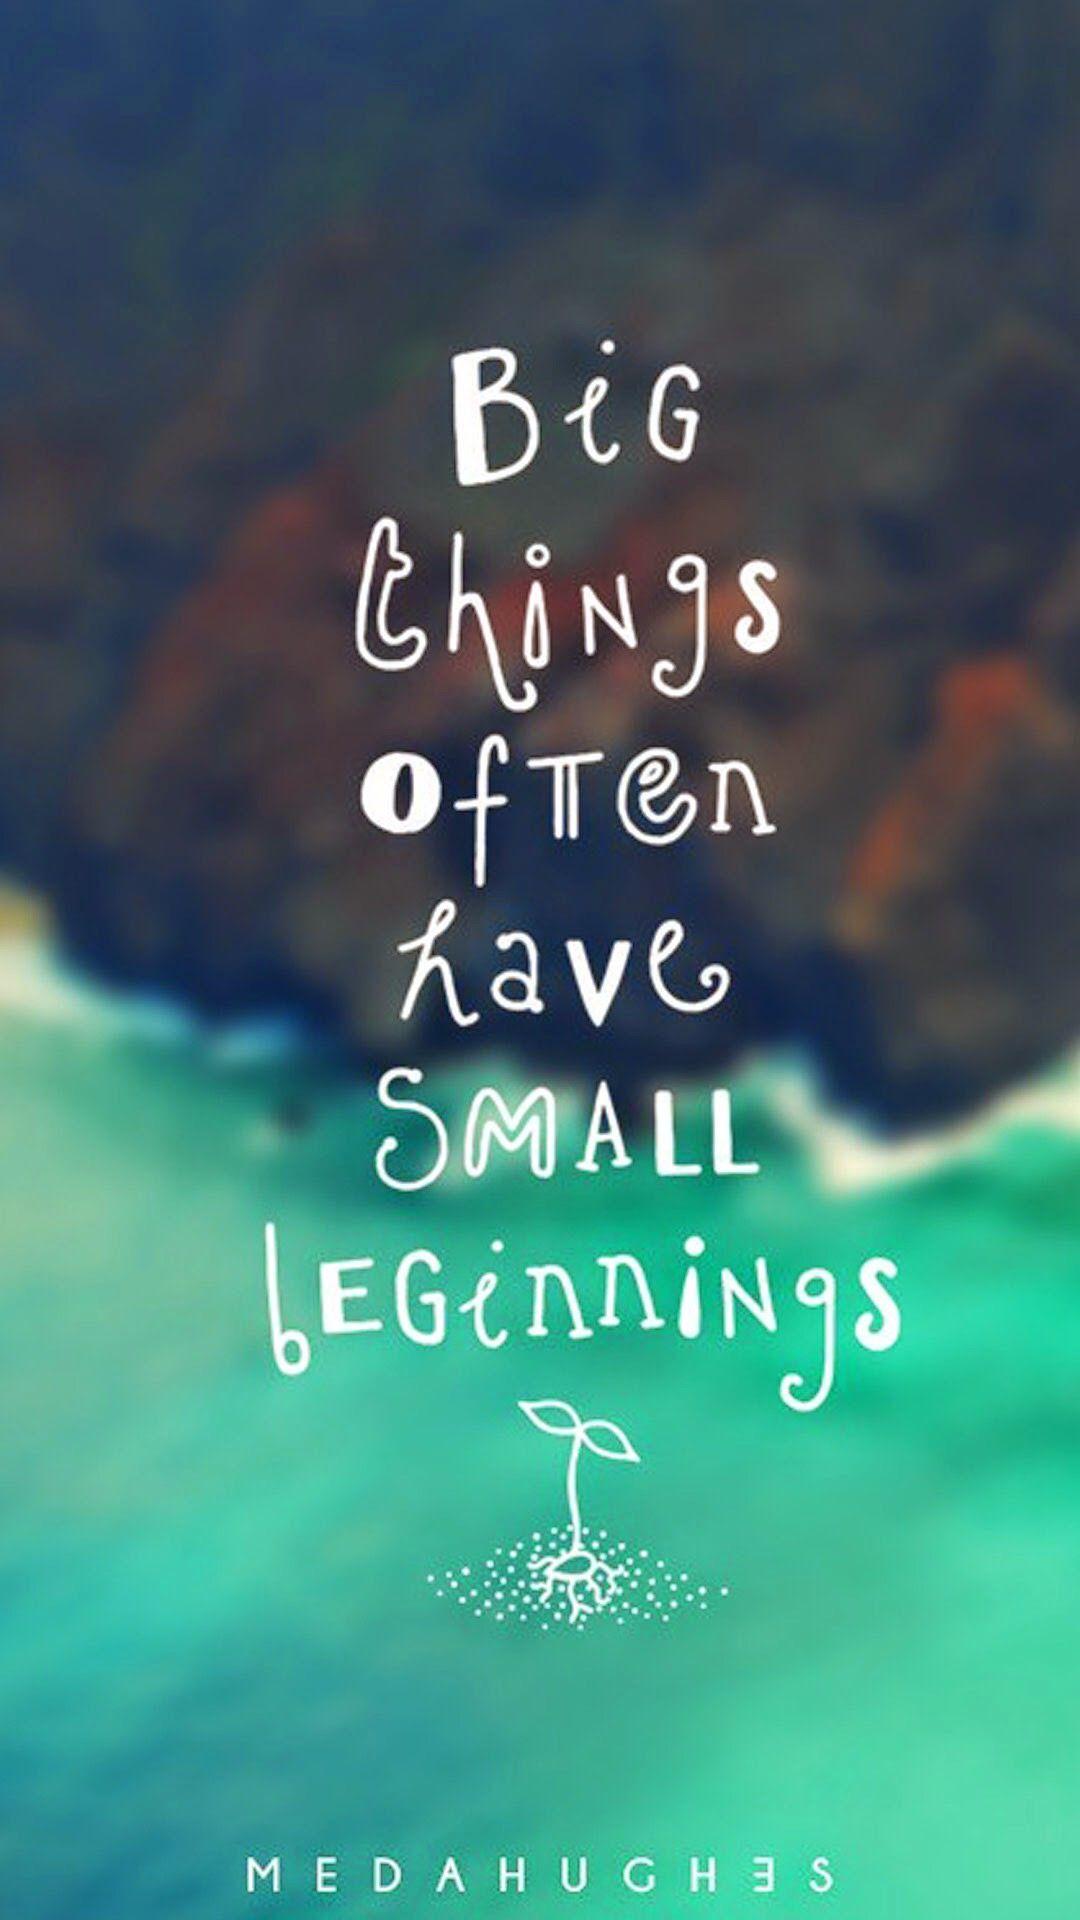 Small Beginning. Inspirational quotes, Inspirational quotes wallpaper, Best inspirational quotes